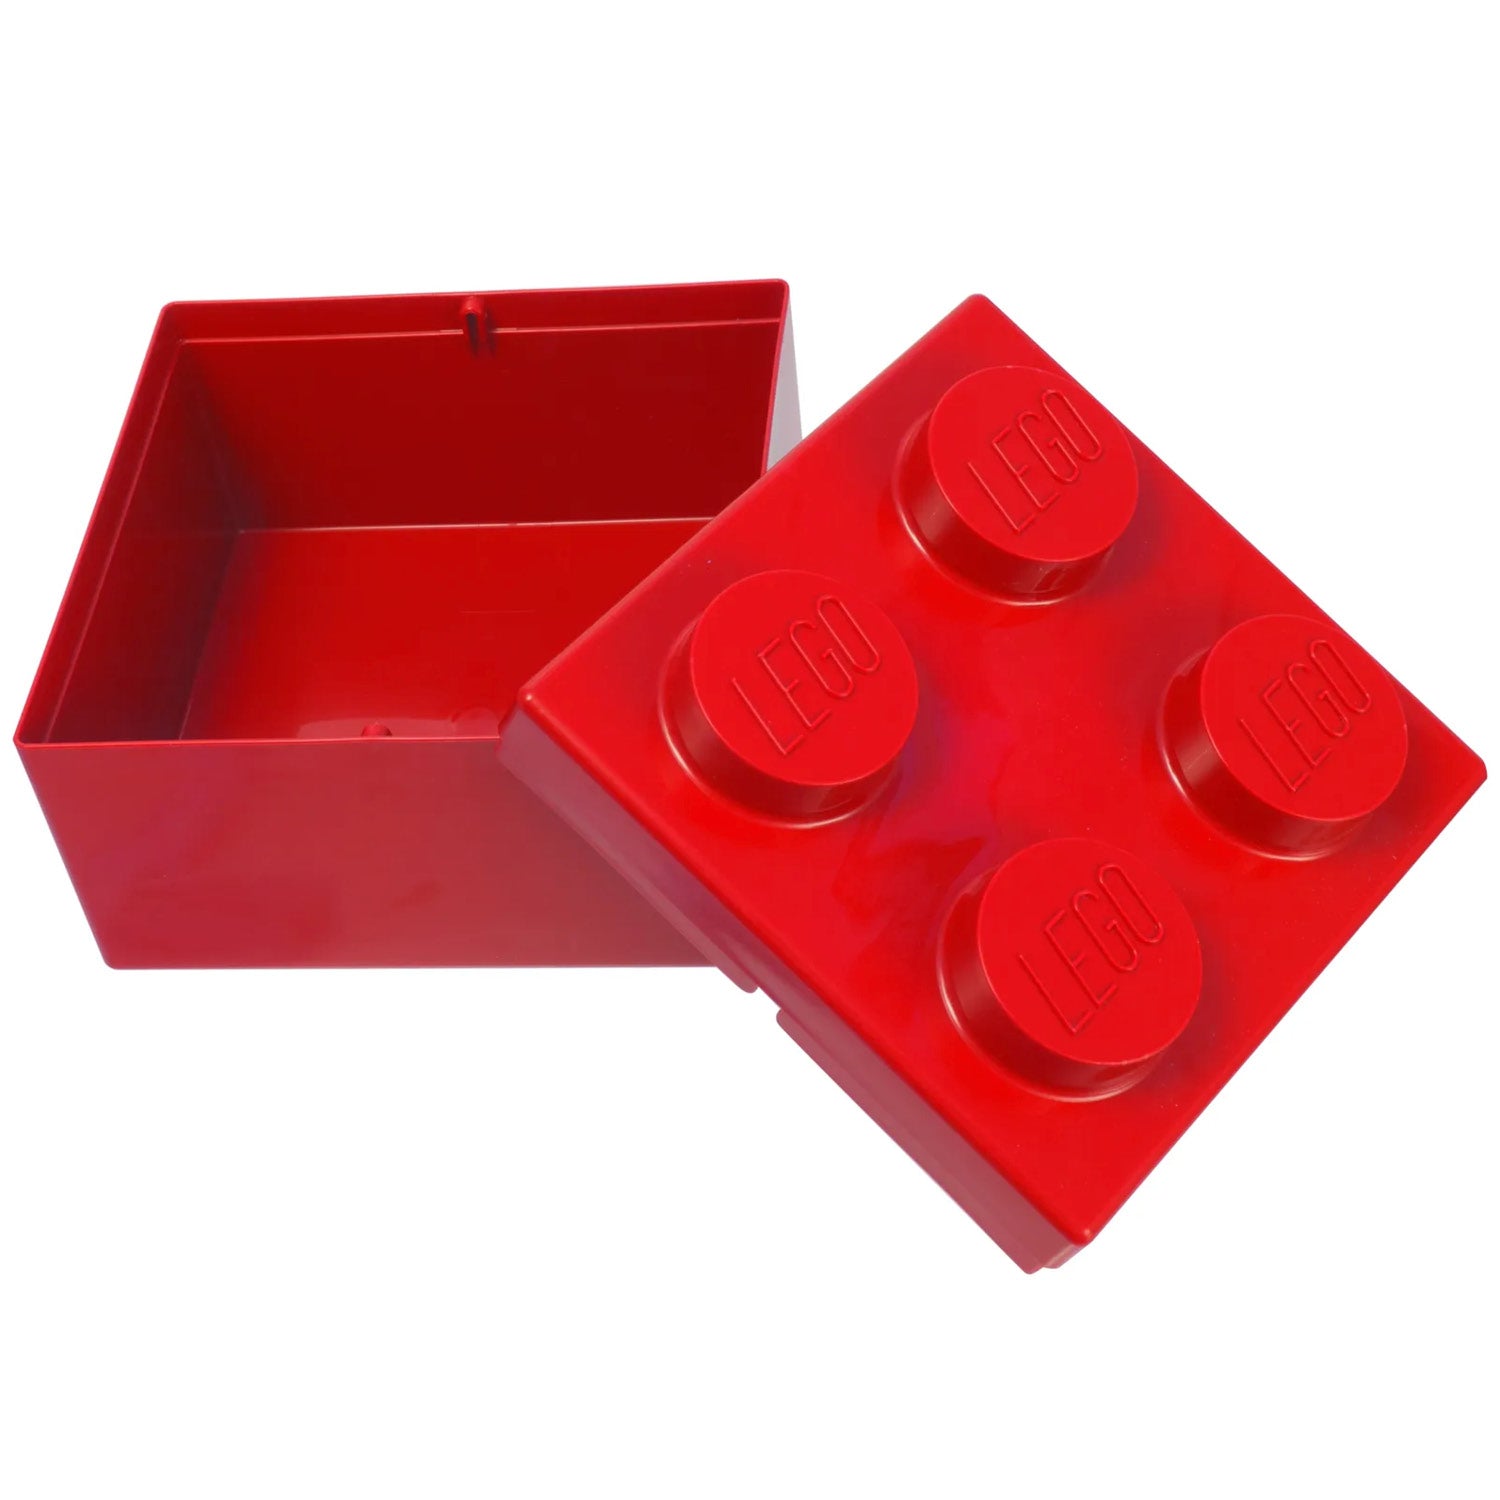 Lego Spare Parts Brick 2x2 (Red)